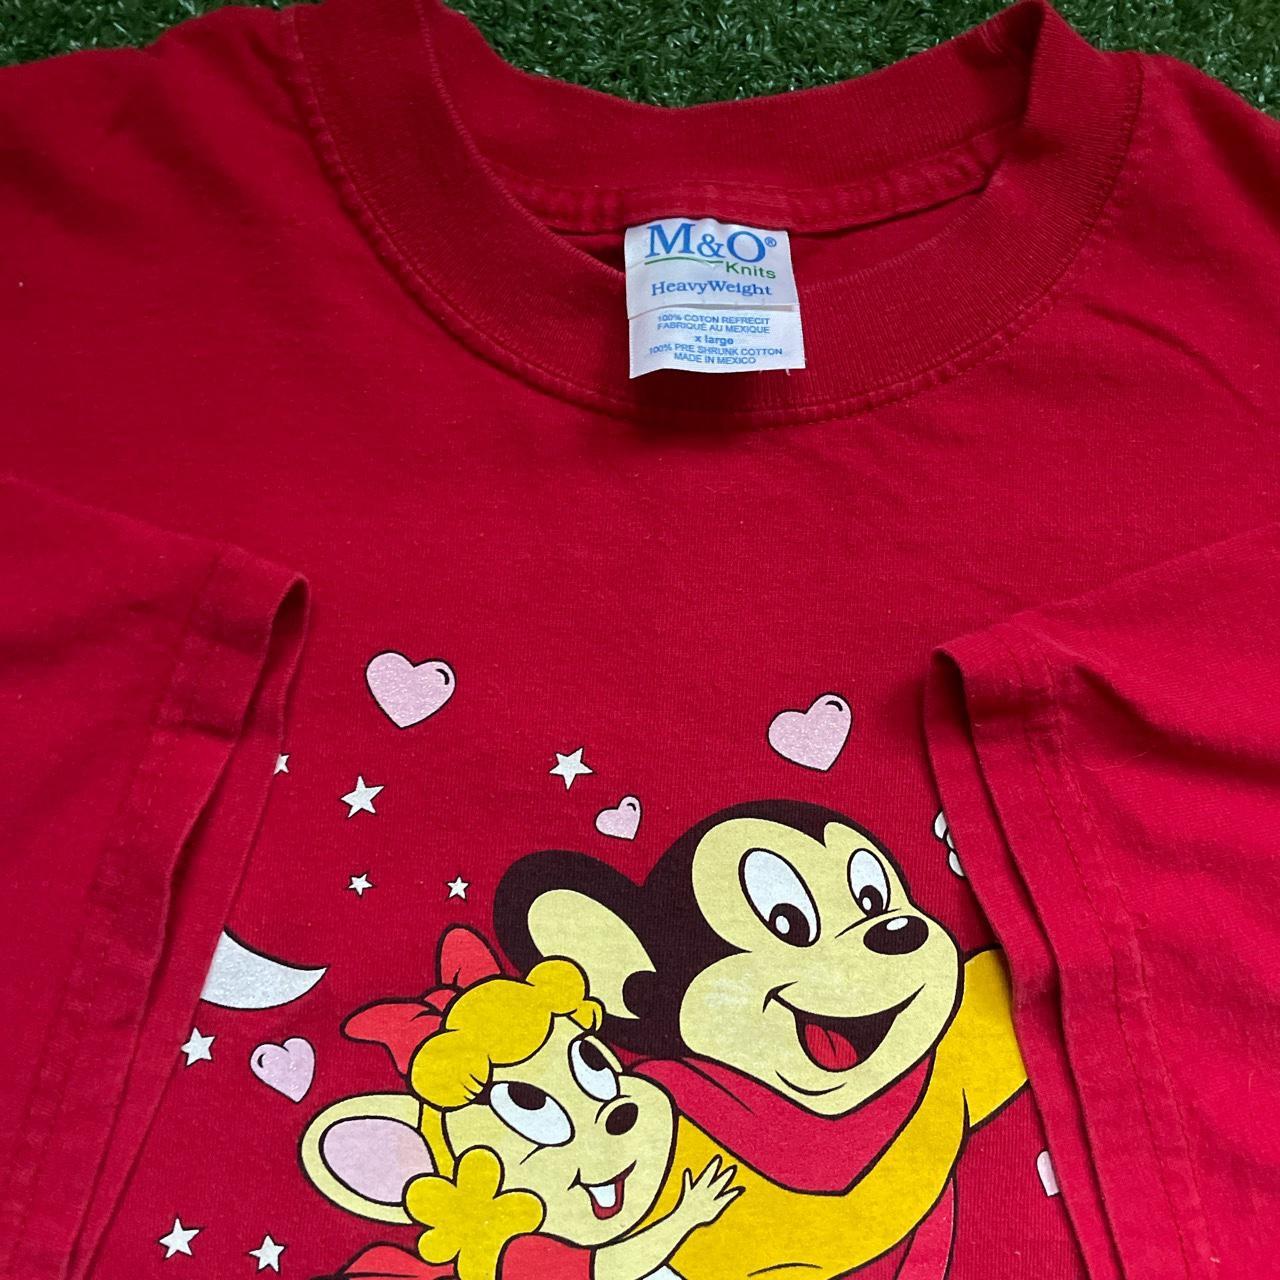 Mighty Mouse Vintage T-Shirt